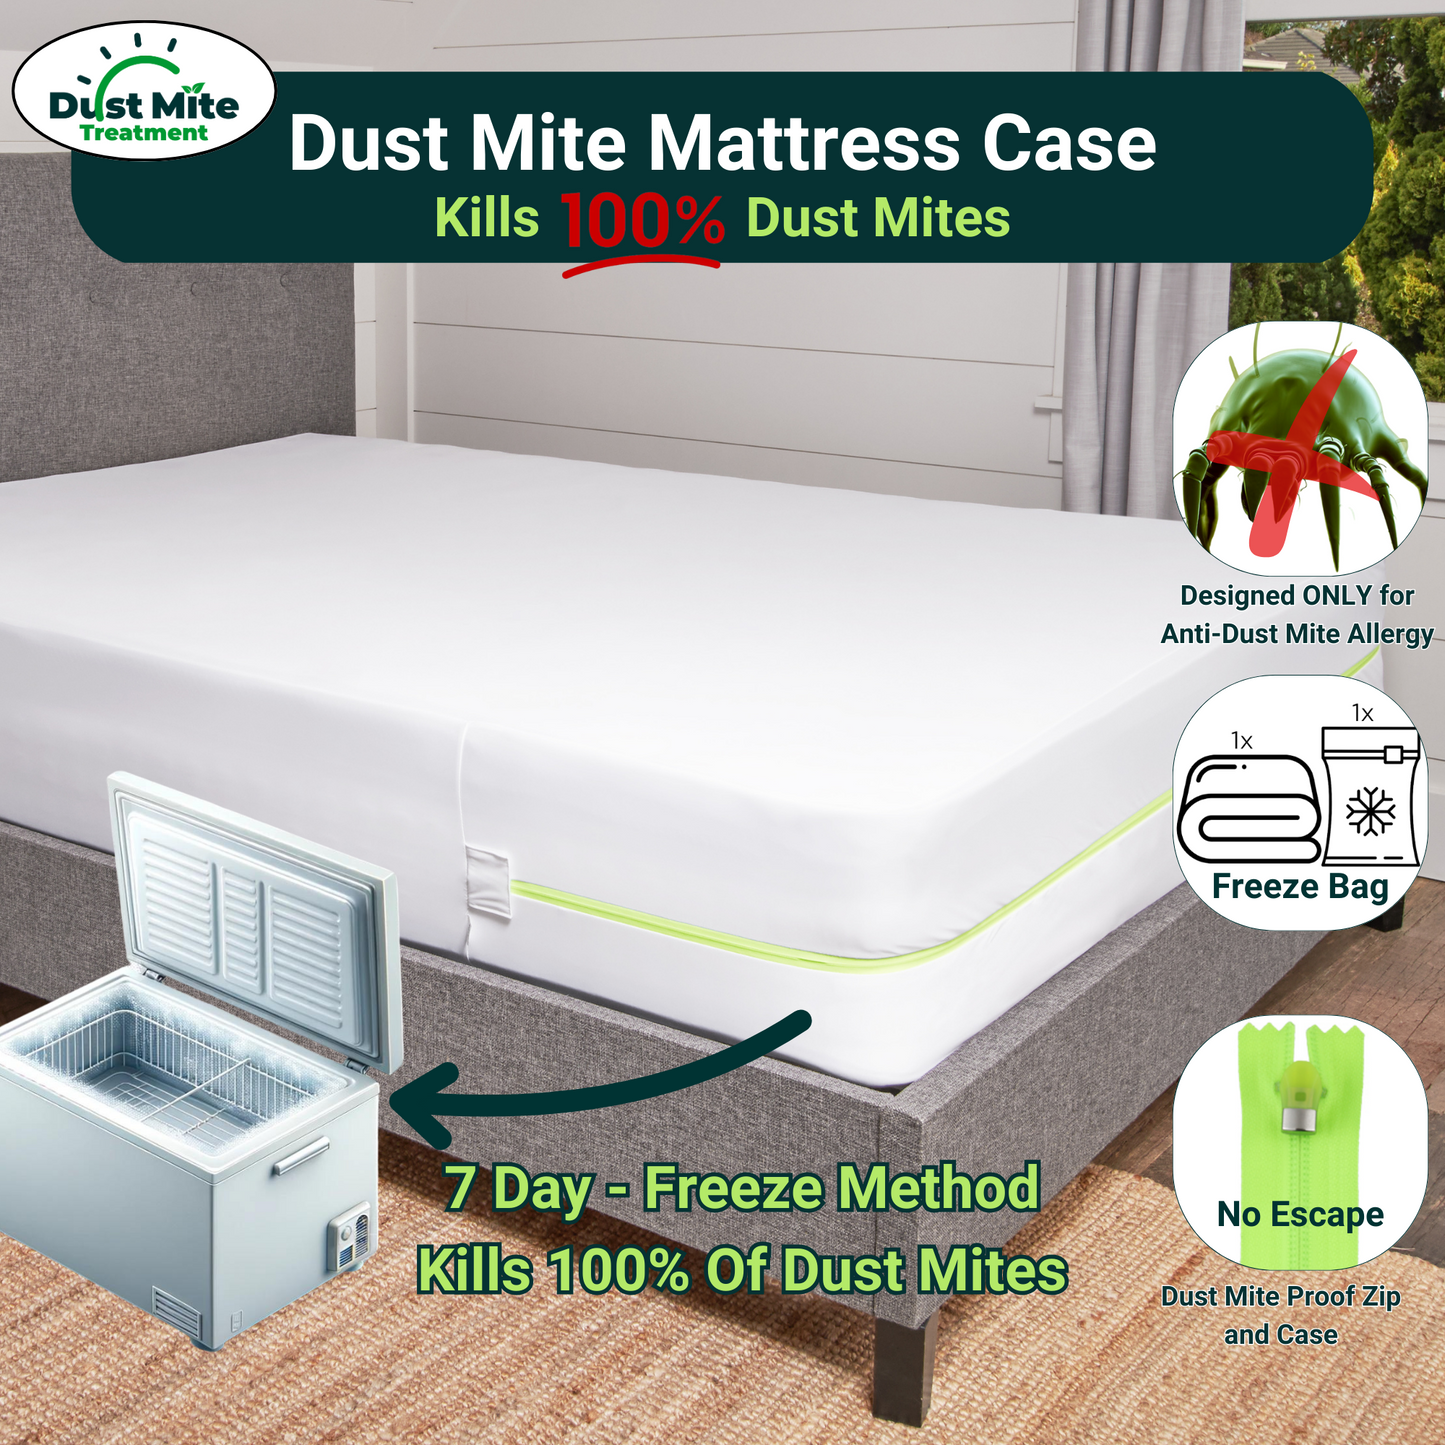 Image of Dust Mite Mattress Case that can be put in a freezer